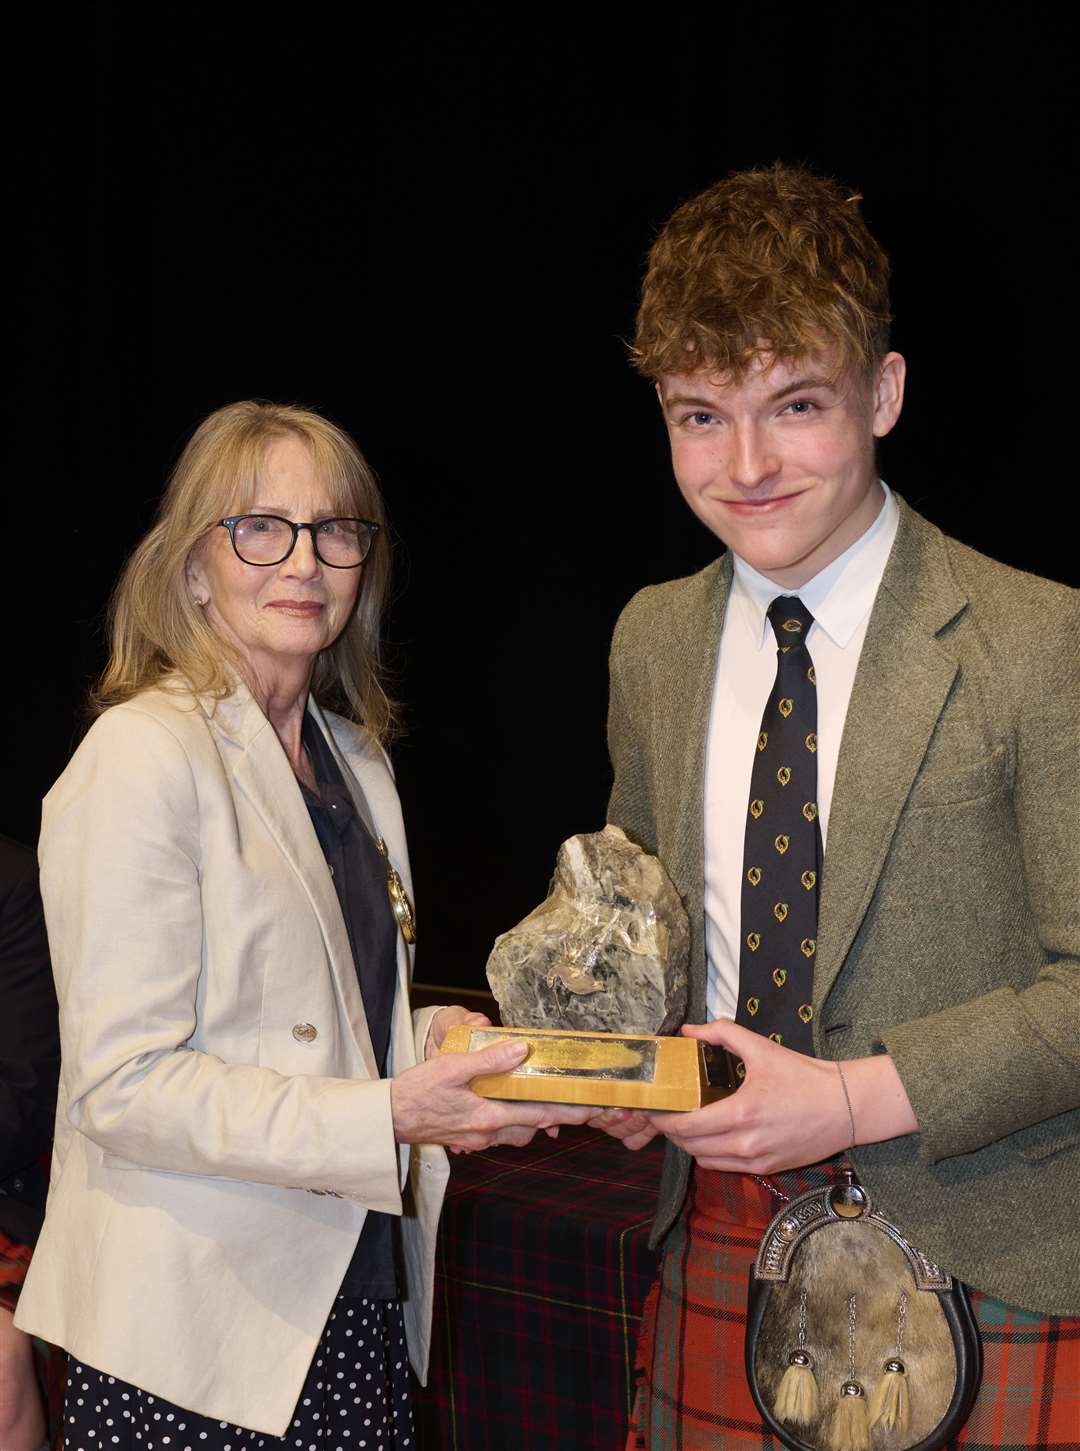 Glynis Campbell-Sinclair (the Provost of Inverness) with Lewis Maxwell who won1st U18 Piobaireachd at the Northern Meeting 2022 which was held at Eden Court in Inverness.